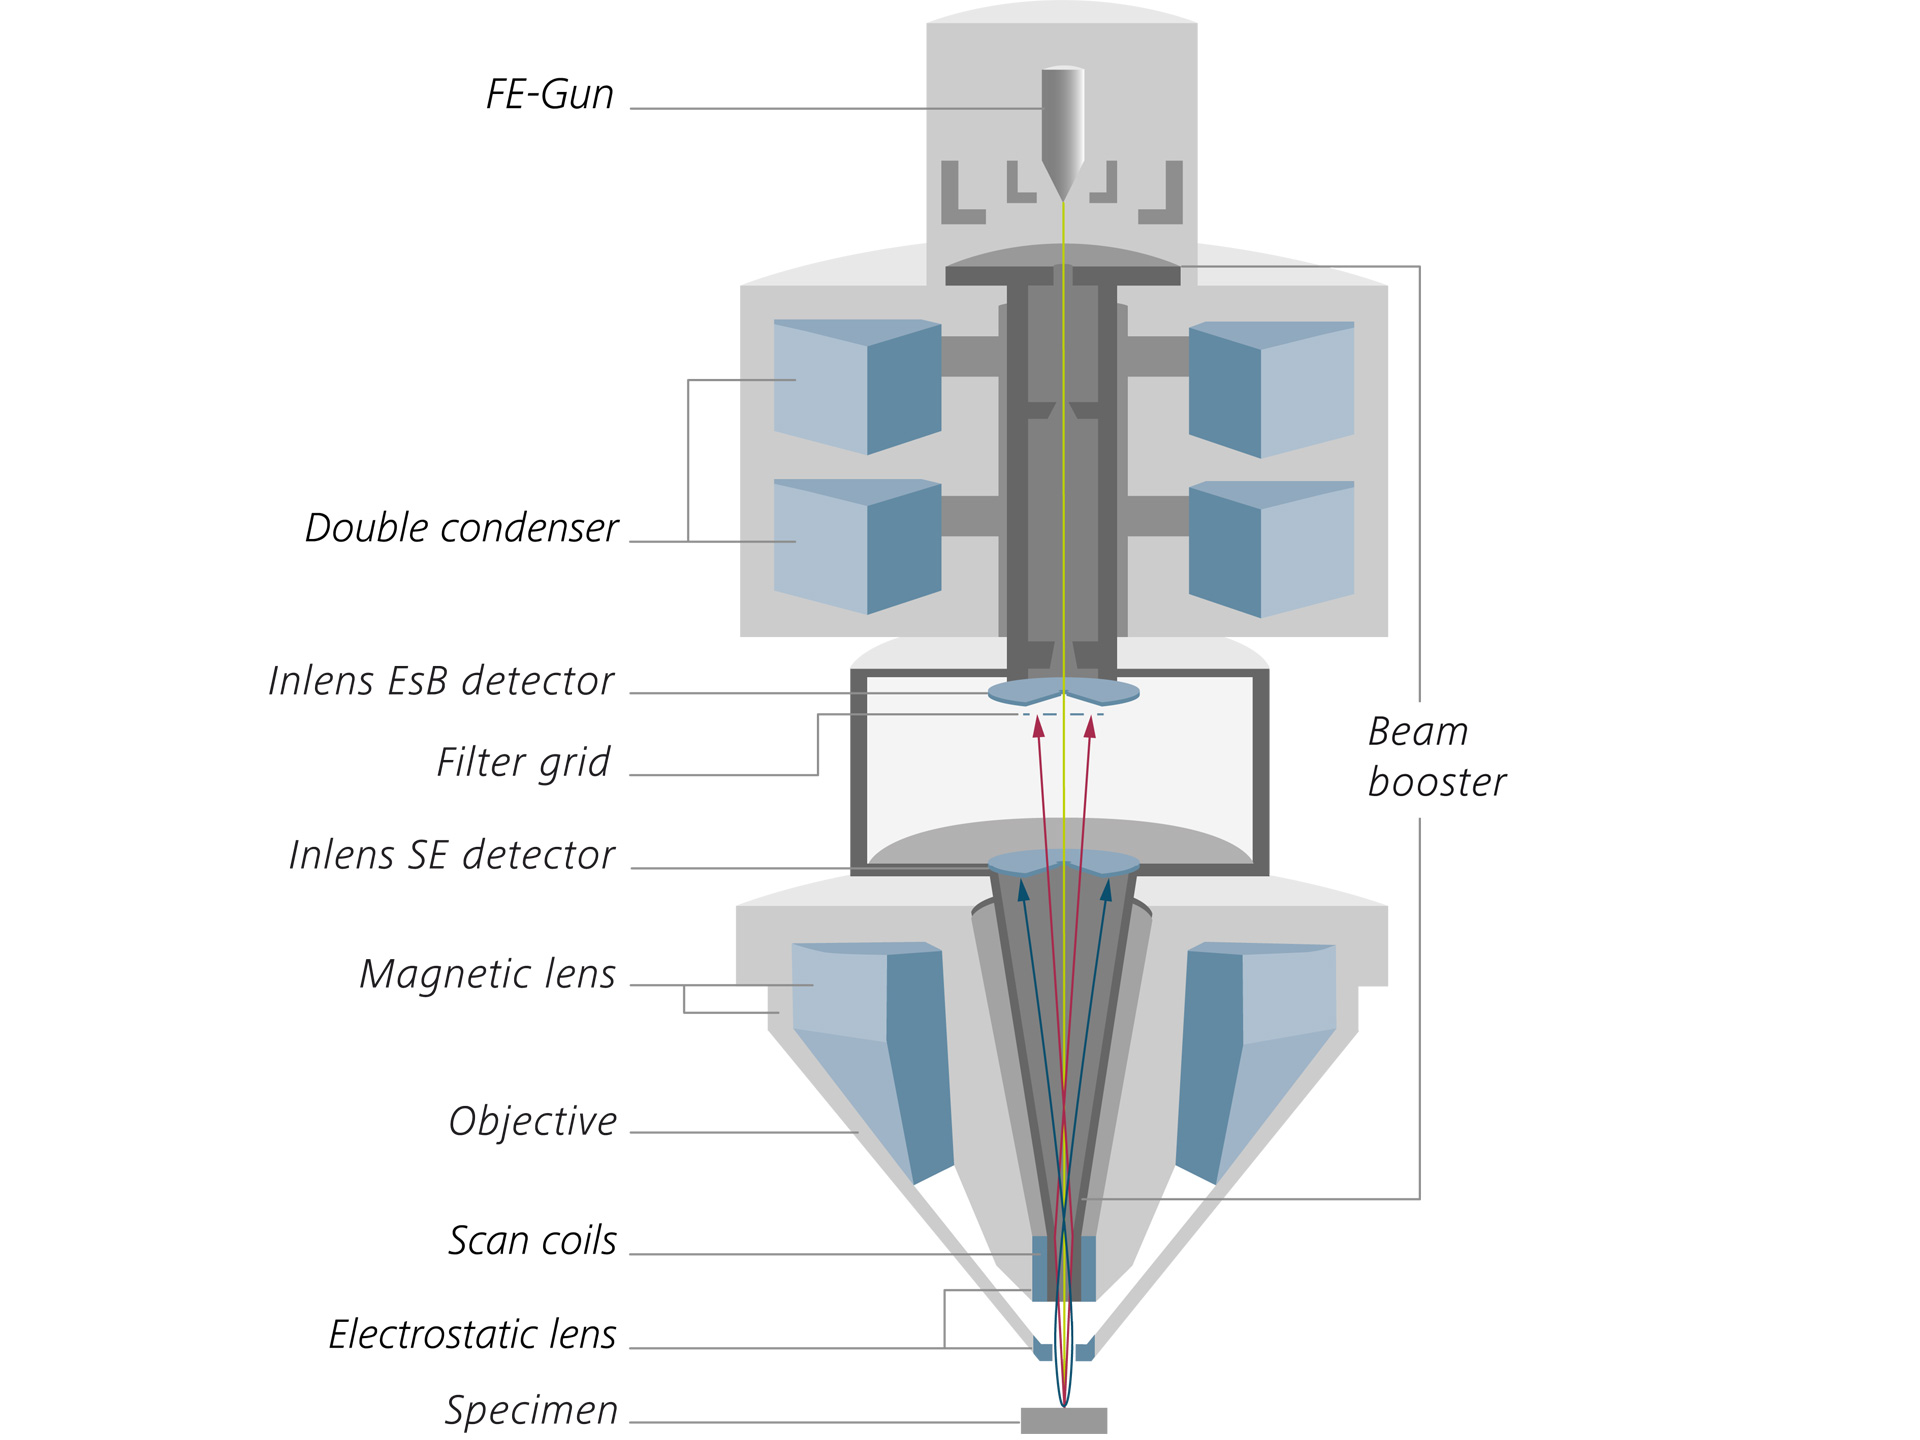 Gemini technology. Schematic cross-section of Gemini 2 optical column with a double condenser, beam booster, Inlens detectors and Gemini objective. 